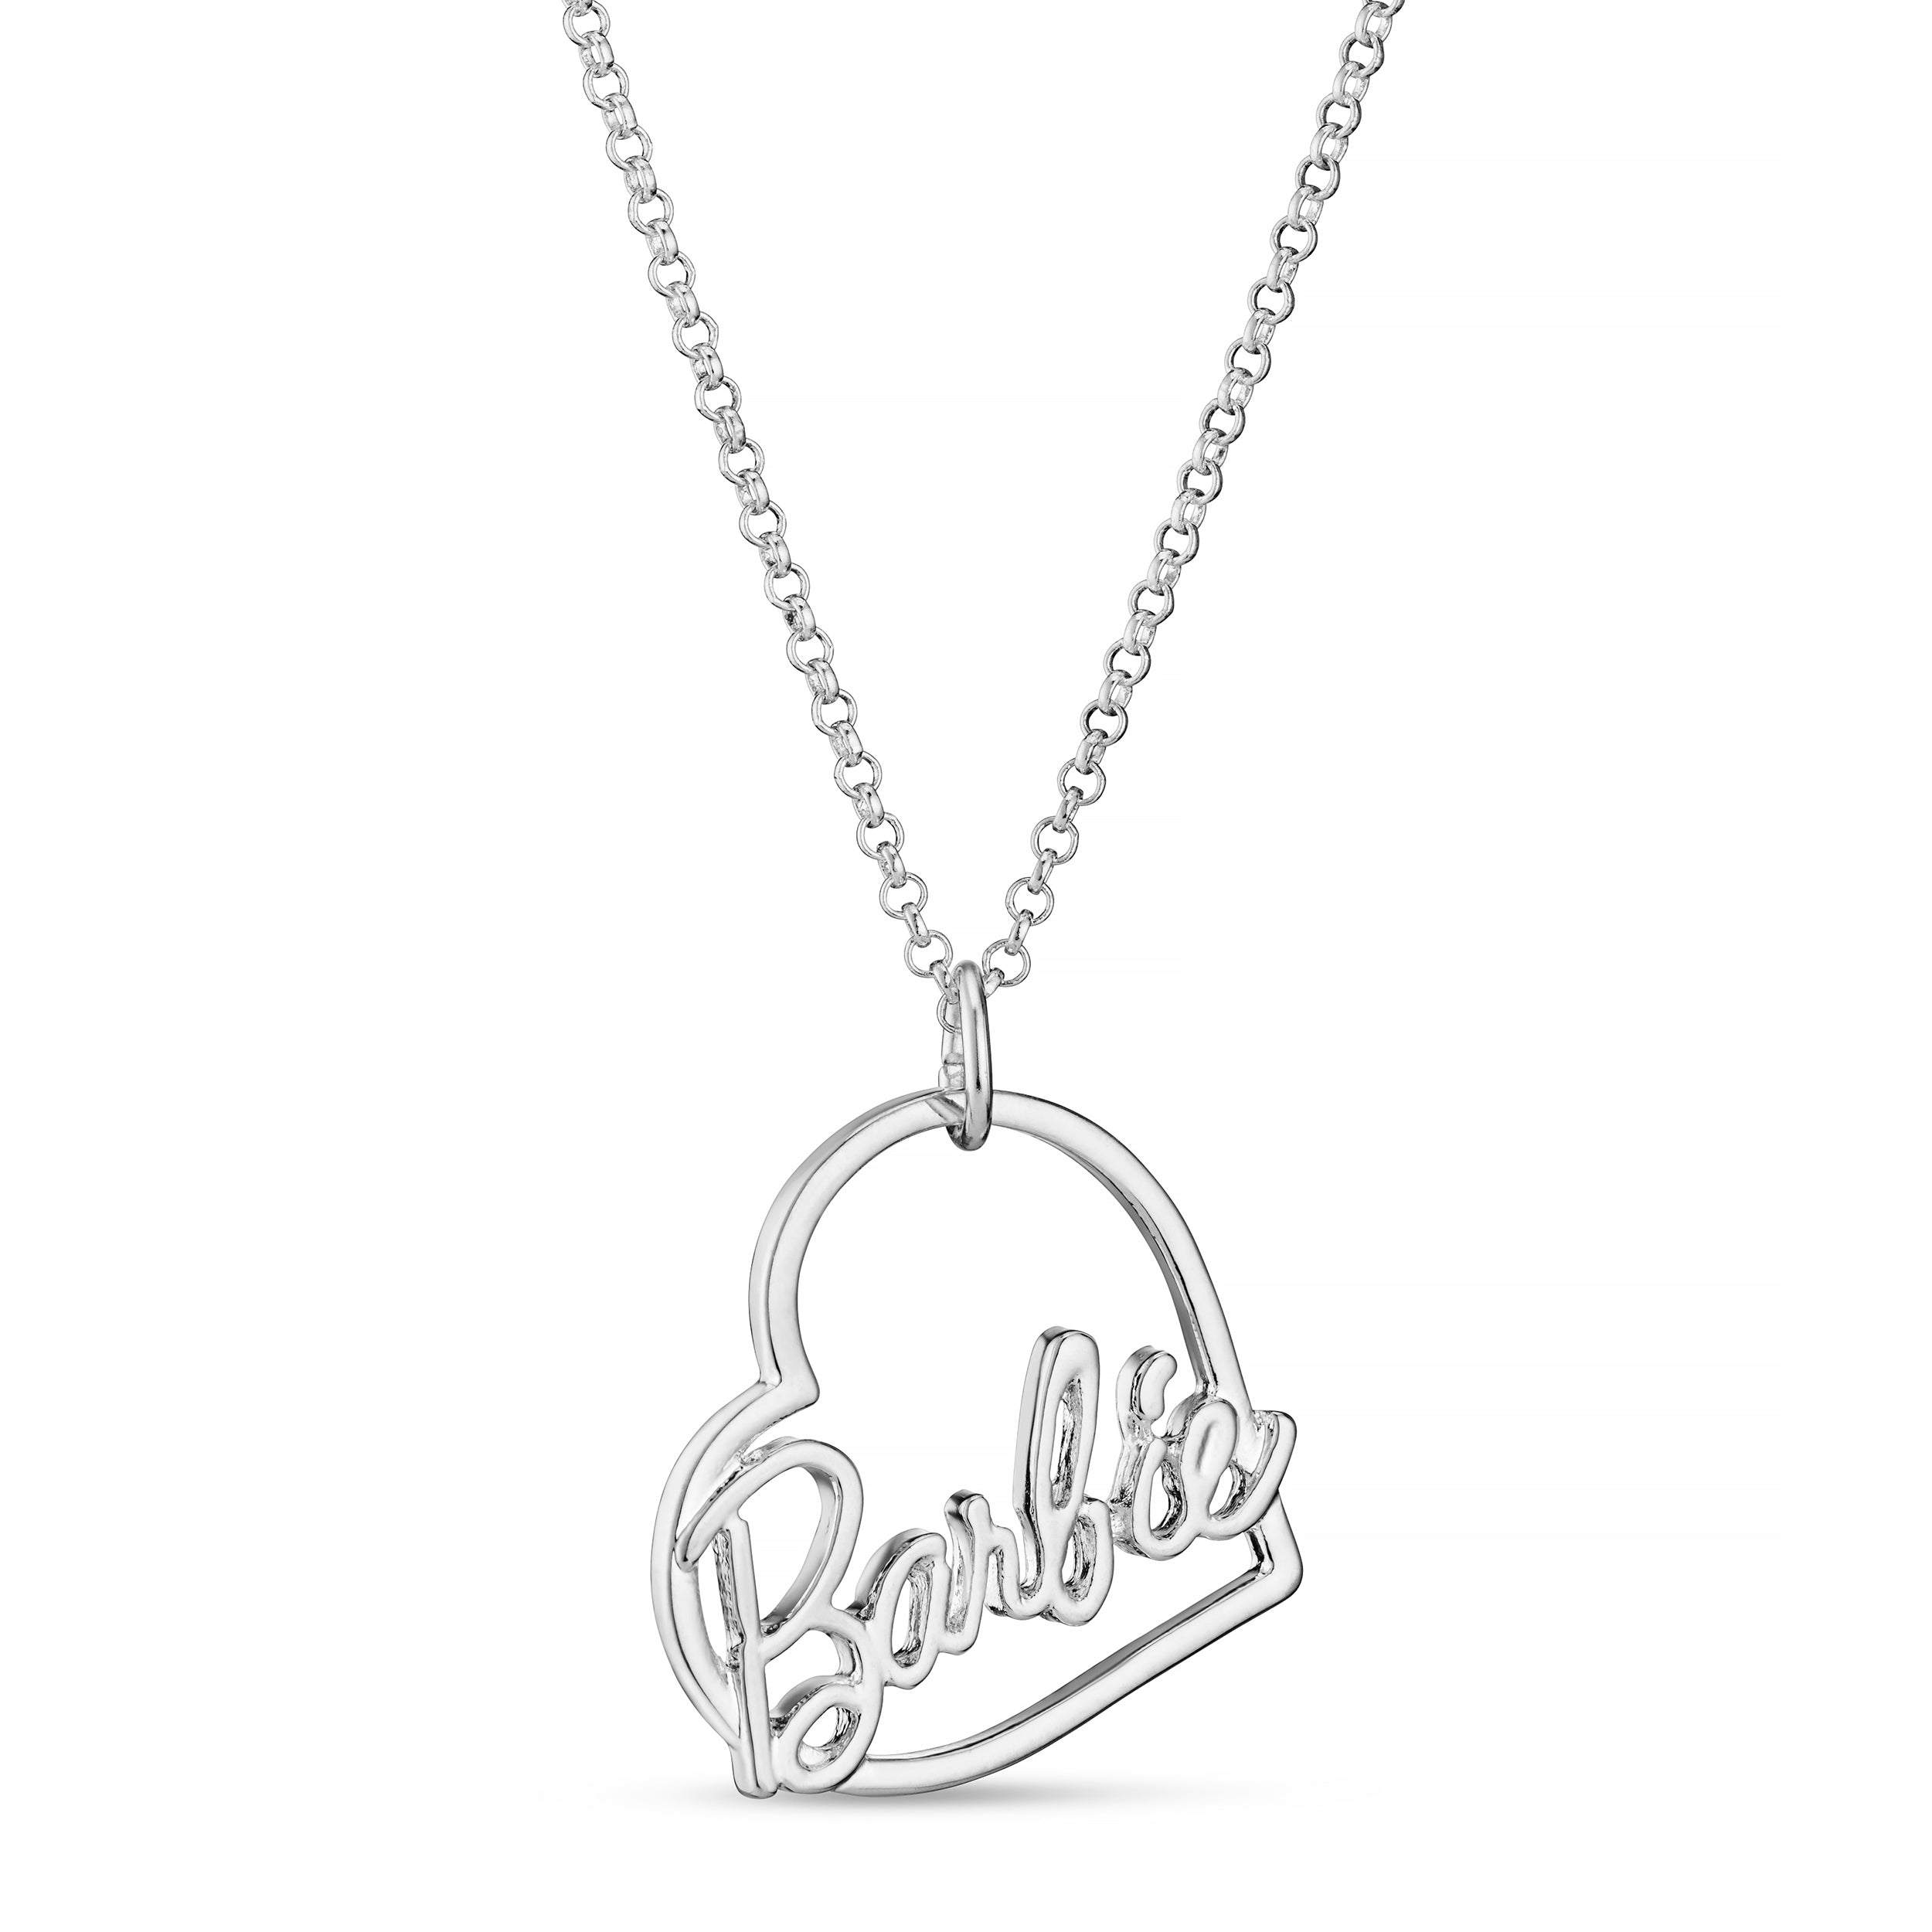  Barbie Chunky Heart Necklace - Gold : Toys & Games